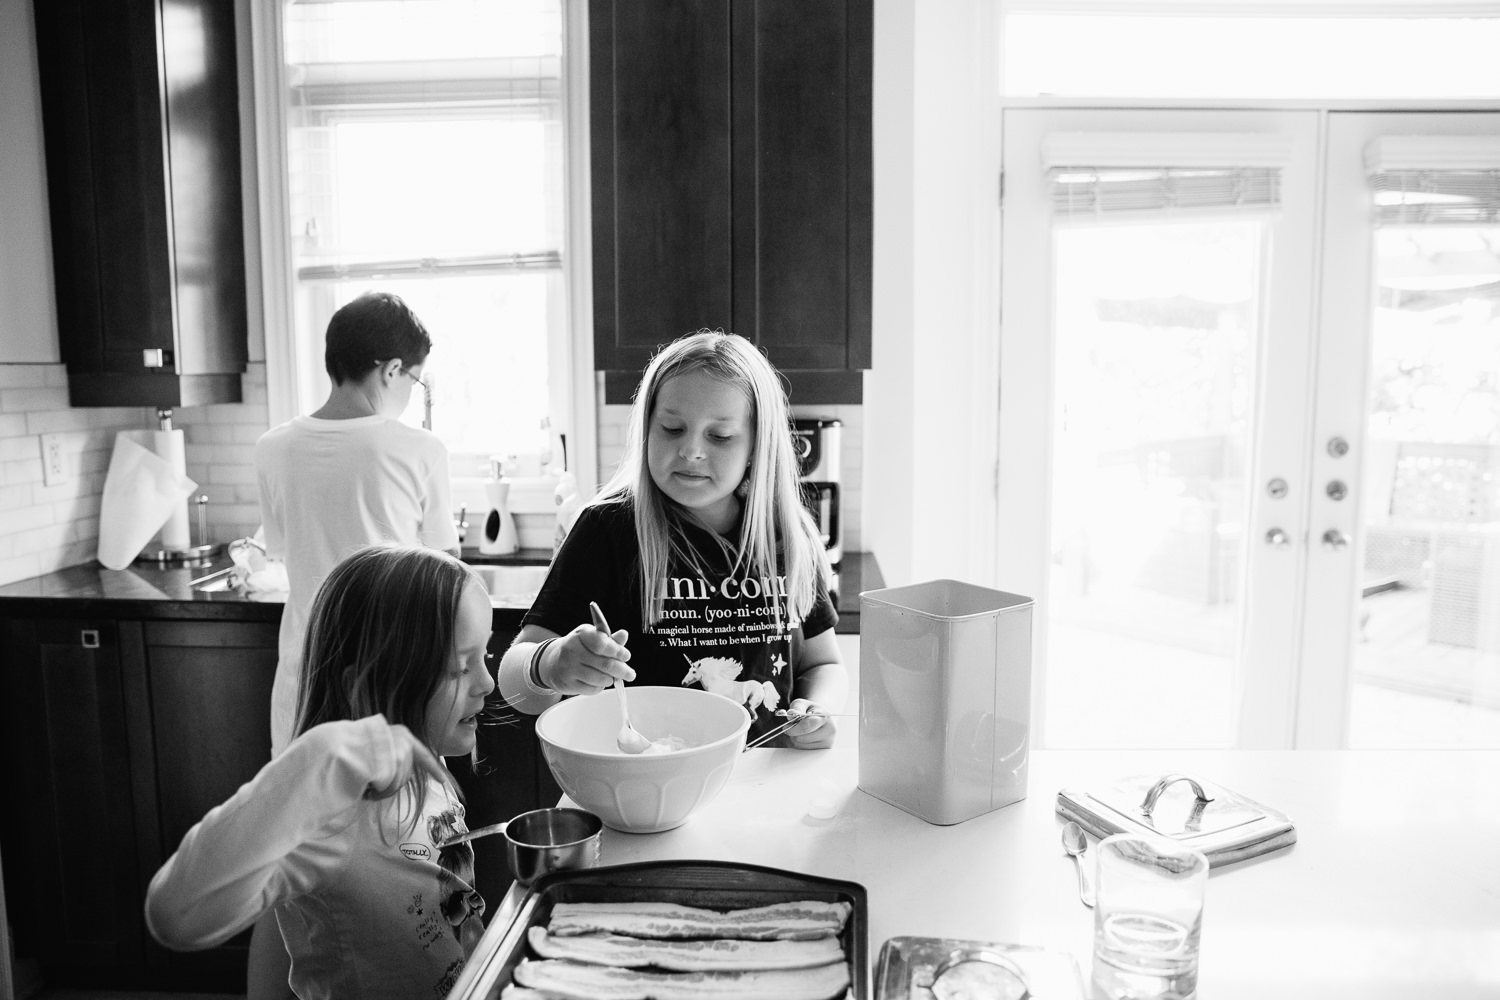 8 and 10 year old sisters standing at kitchen island mixing pancake batter for family brunch, 13 year old brother at sink behind them - Stouffville Lifestyle Photography